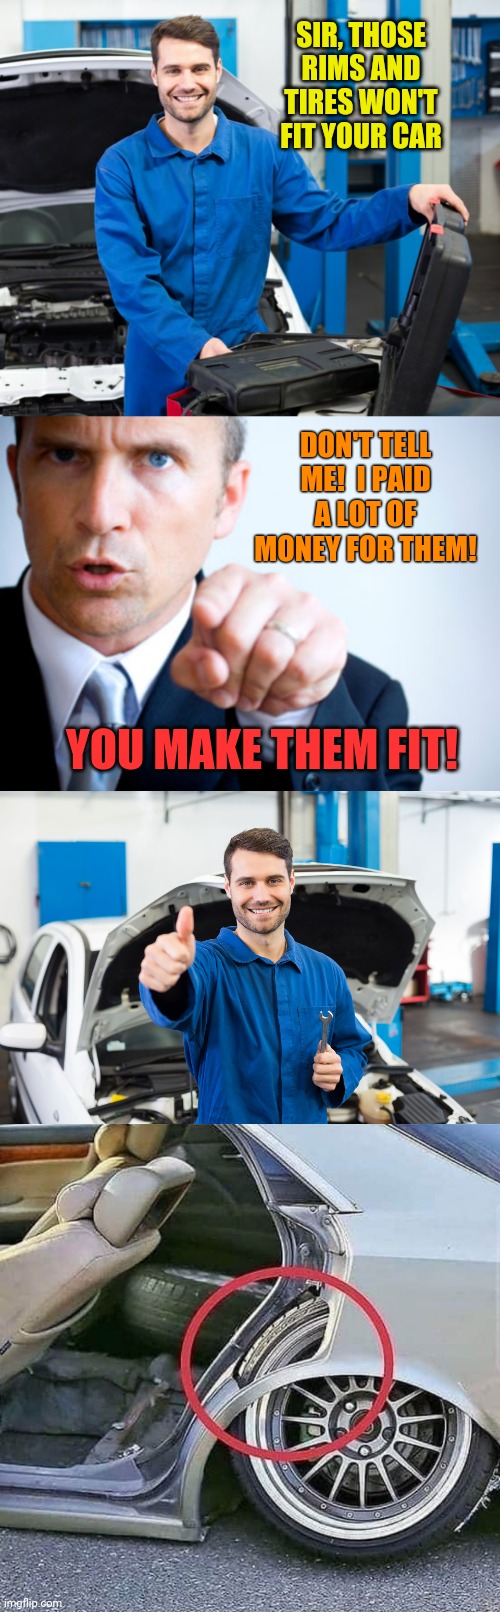 The Customer is Always Right | SIR, THOSE RIMS AND TIRES WON'T FIT YOUR CAR; DON'T TELL ME!  I PAID A LOT OF MONEY FOR THEM! YOU MAKE THEM FIT! | image tagged in mechanic,arrogant rich man,customer service,funny memes | made w/ Imgflip meme maker